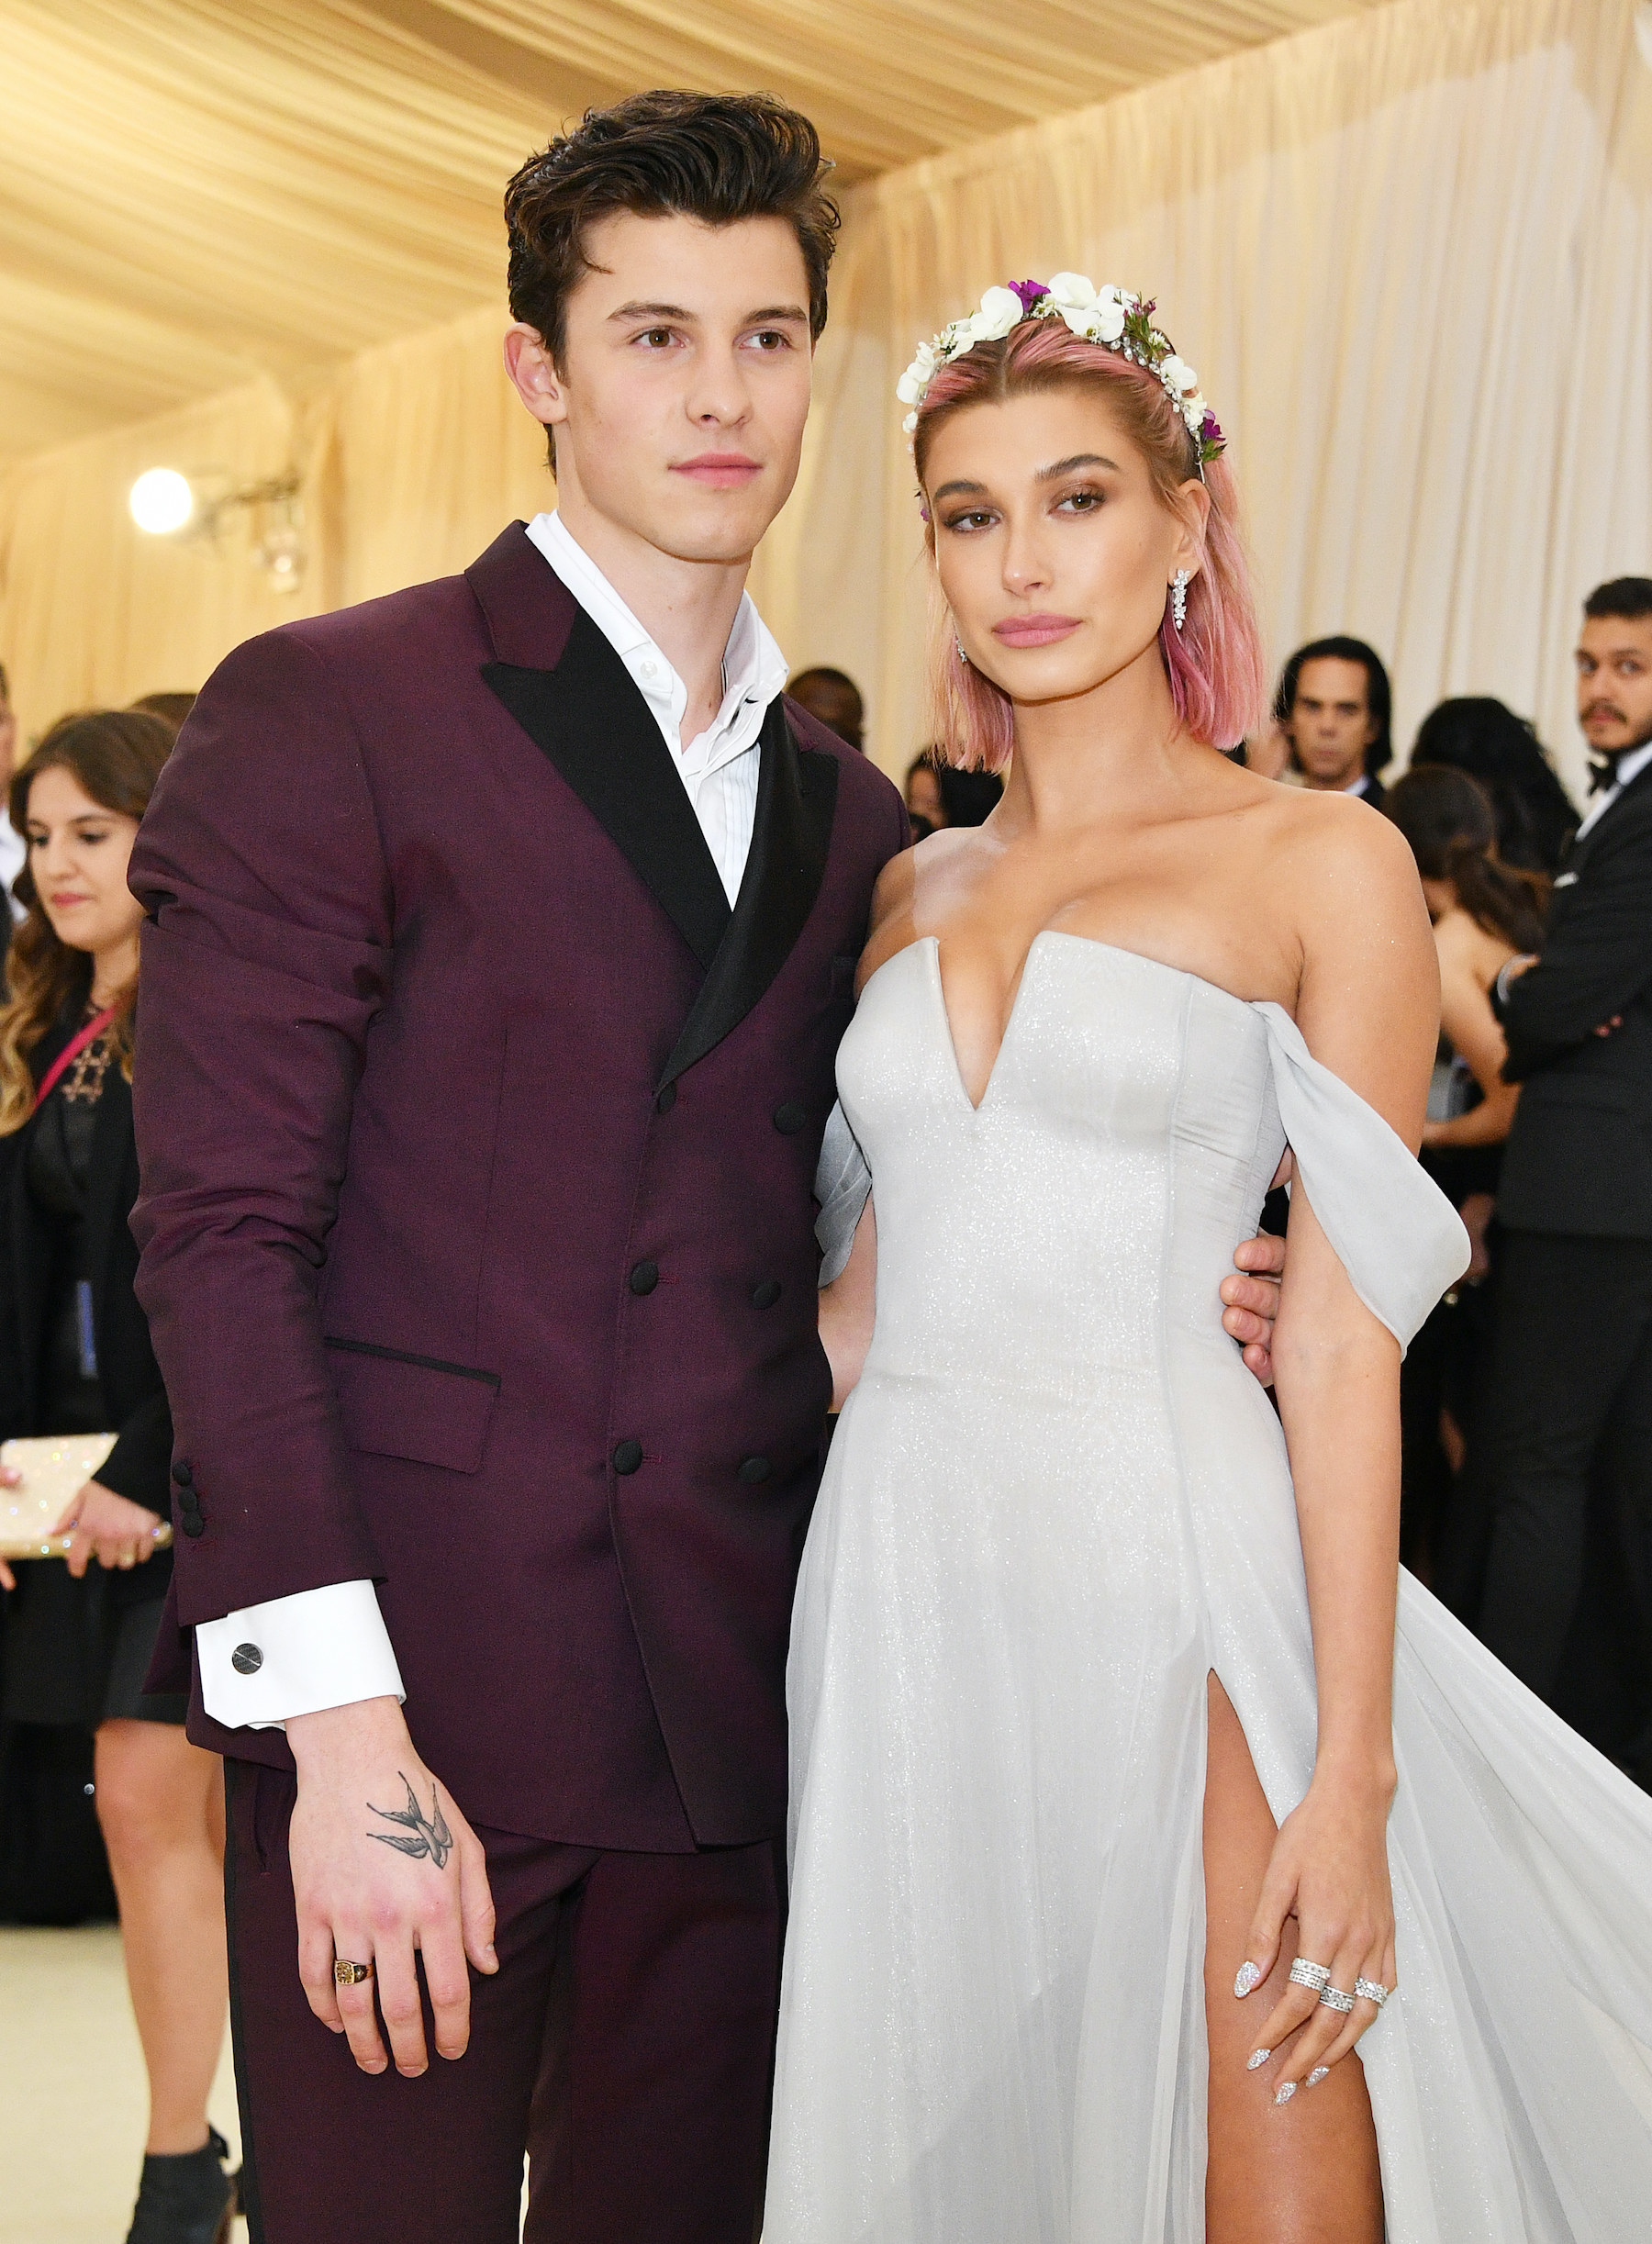 Shawn Mendes and Hailey Bieber pose together